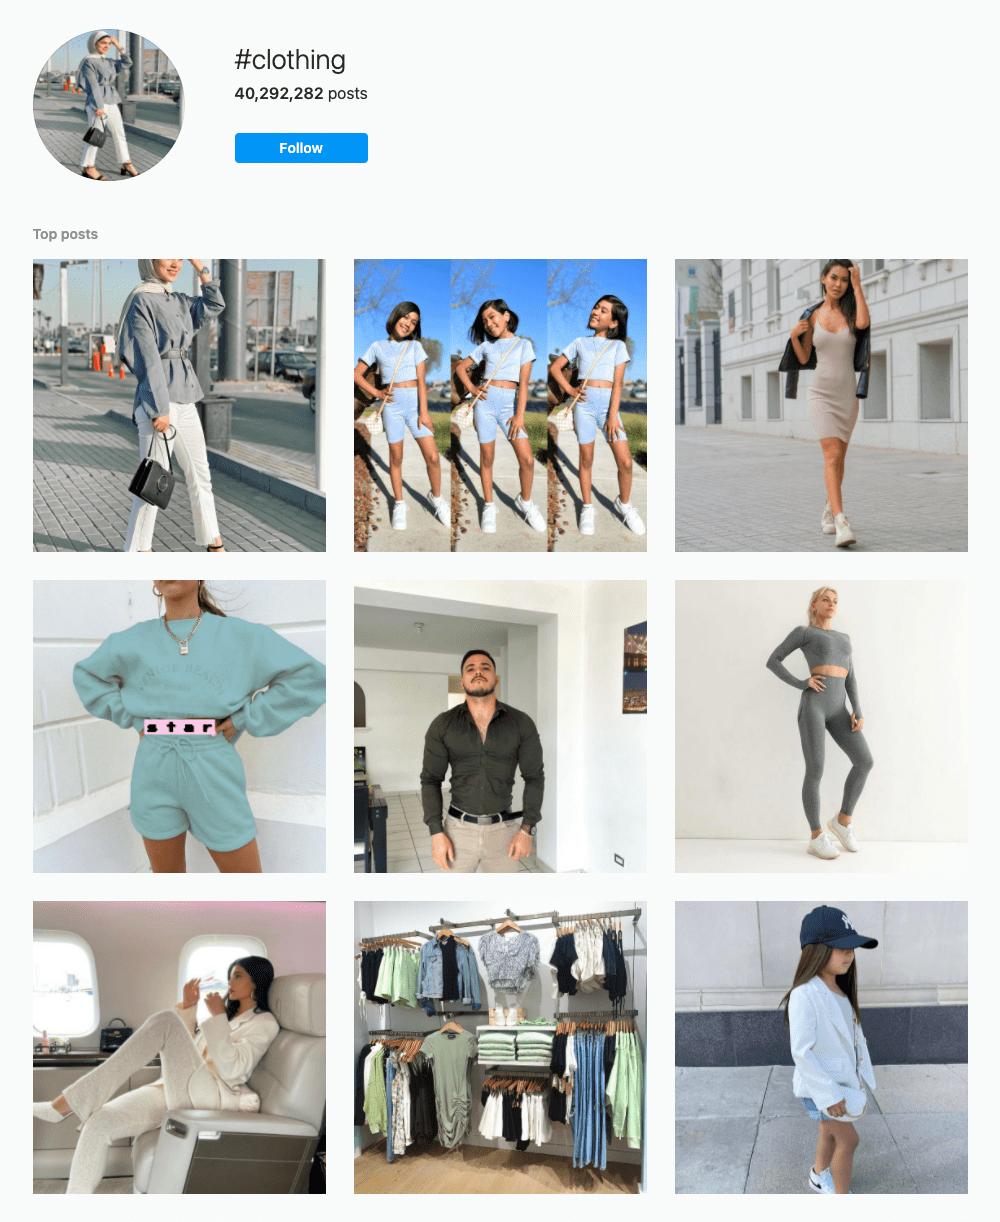 #clothing Hashtags for Instagram